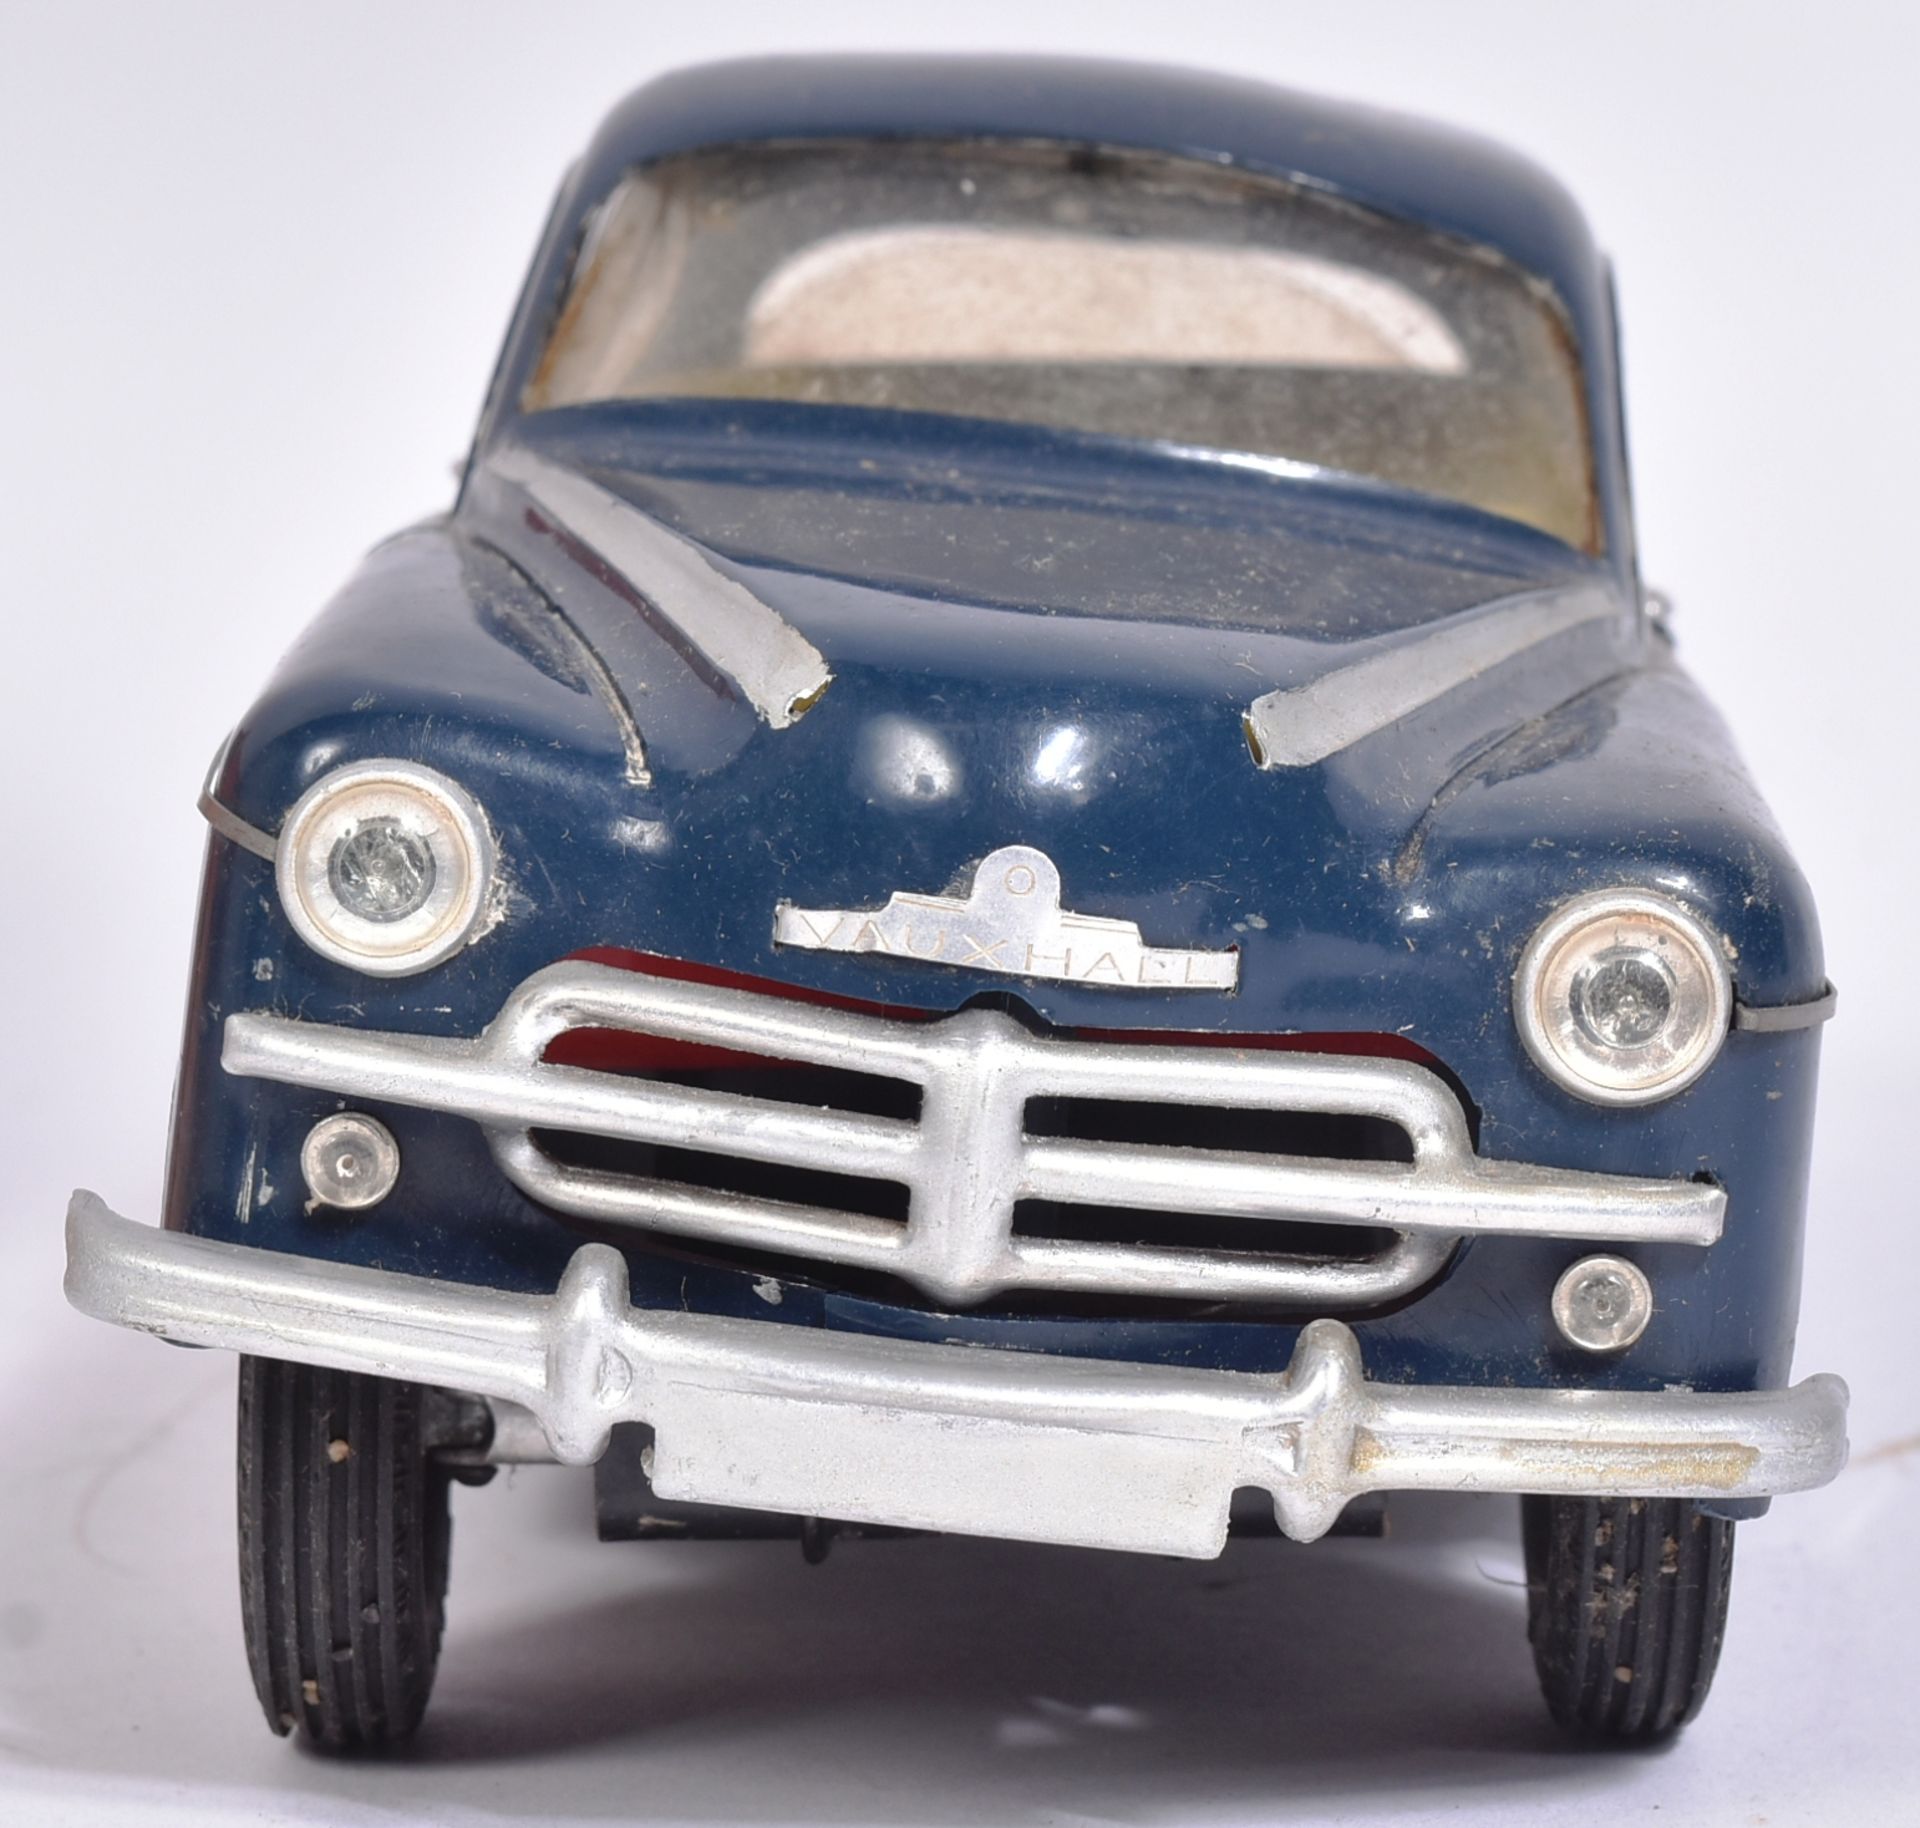 VICTORY MODELS 1953 VAUXHALL VELOX BATTERY OPERATED CAR - Image 3 of 6